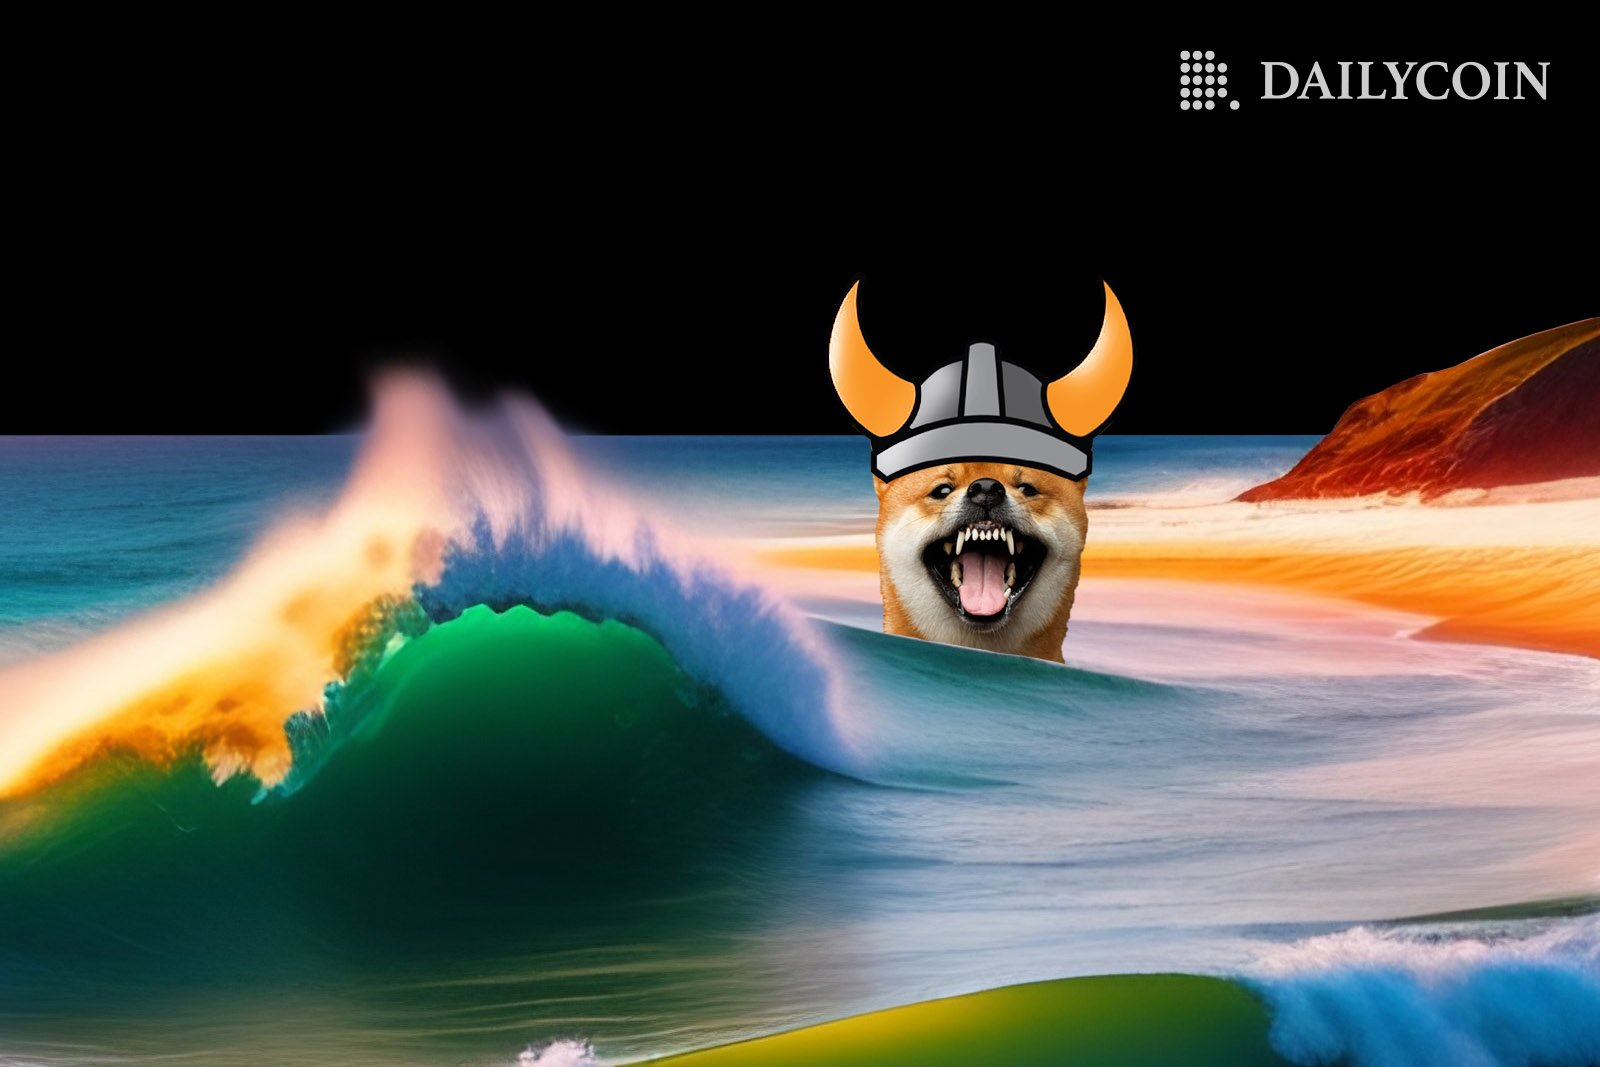 Floki mascot Shiba Inu dog with Viking horns emerging from the sea and showing sharp teeth.